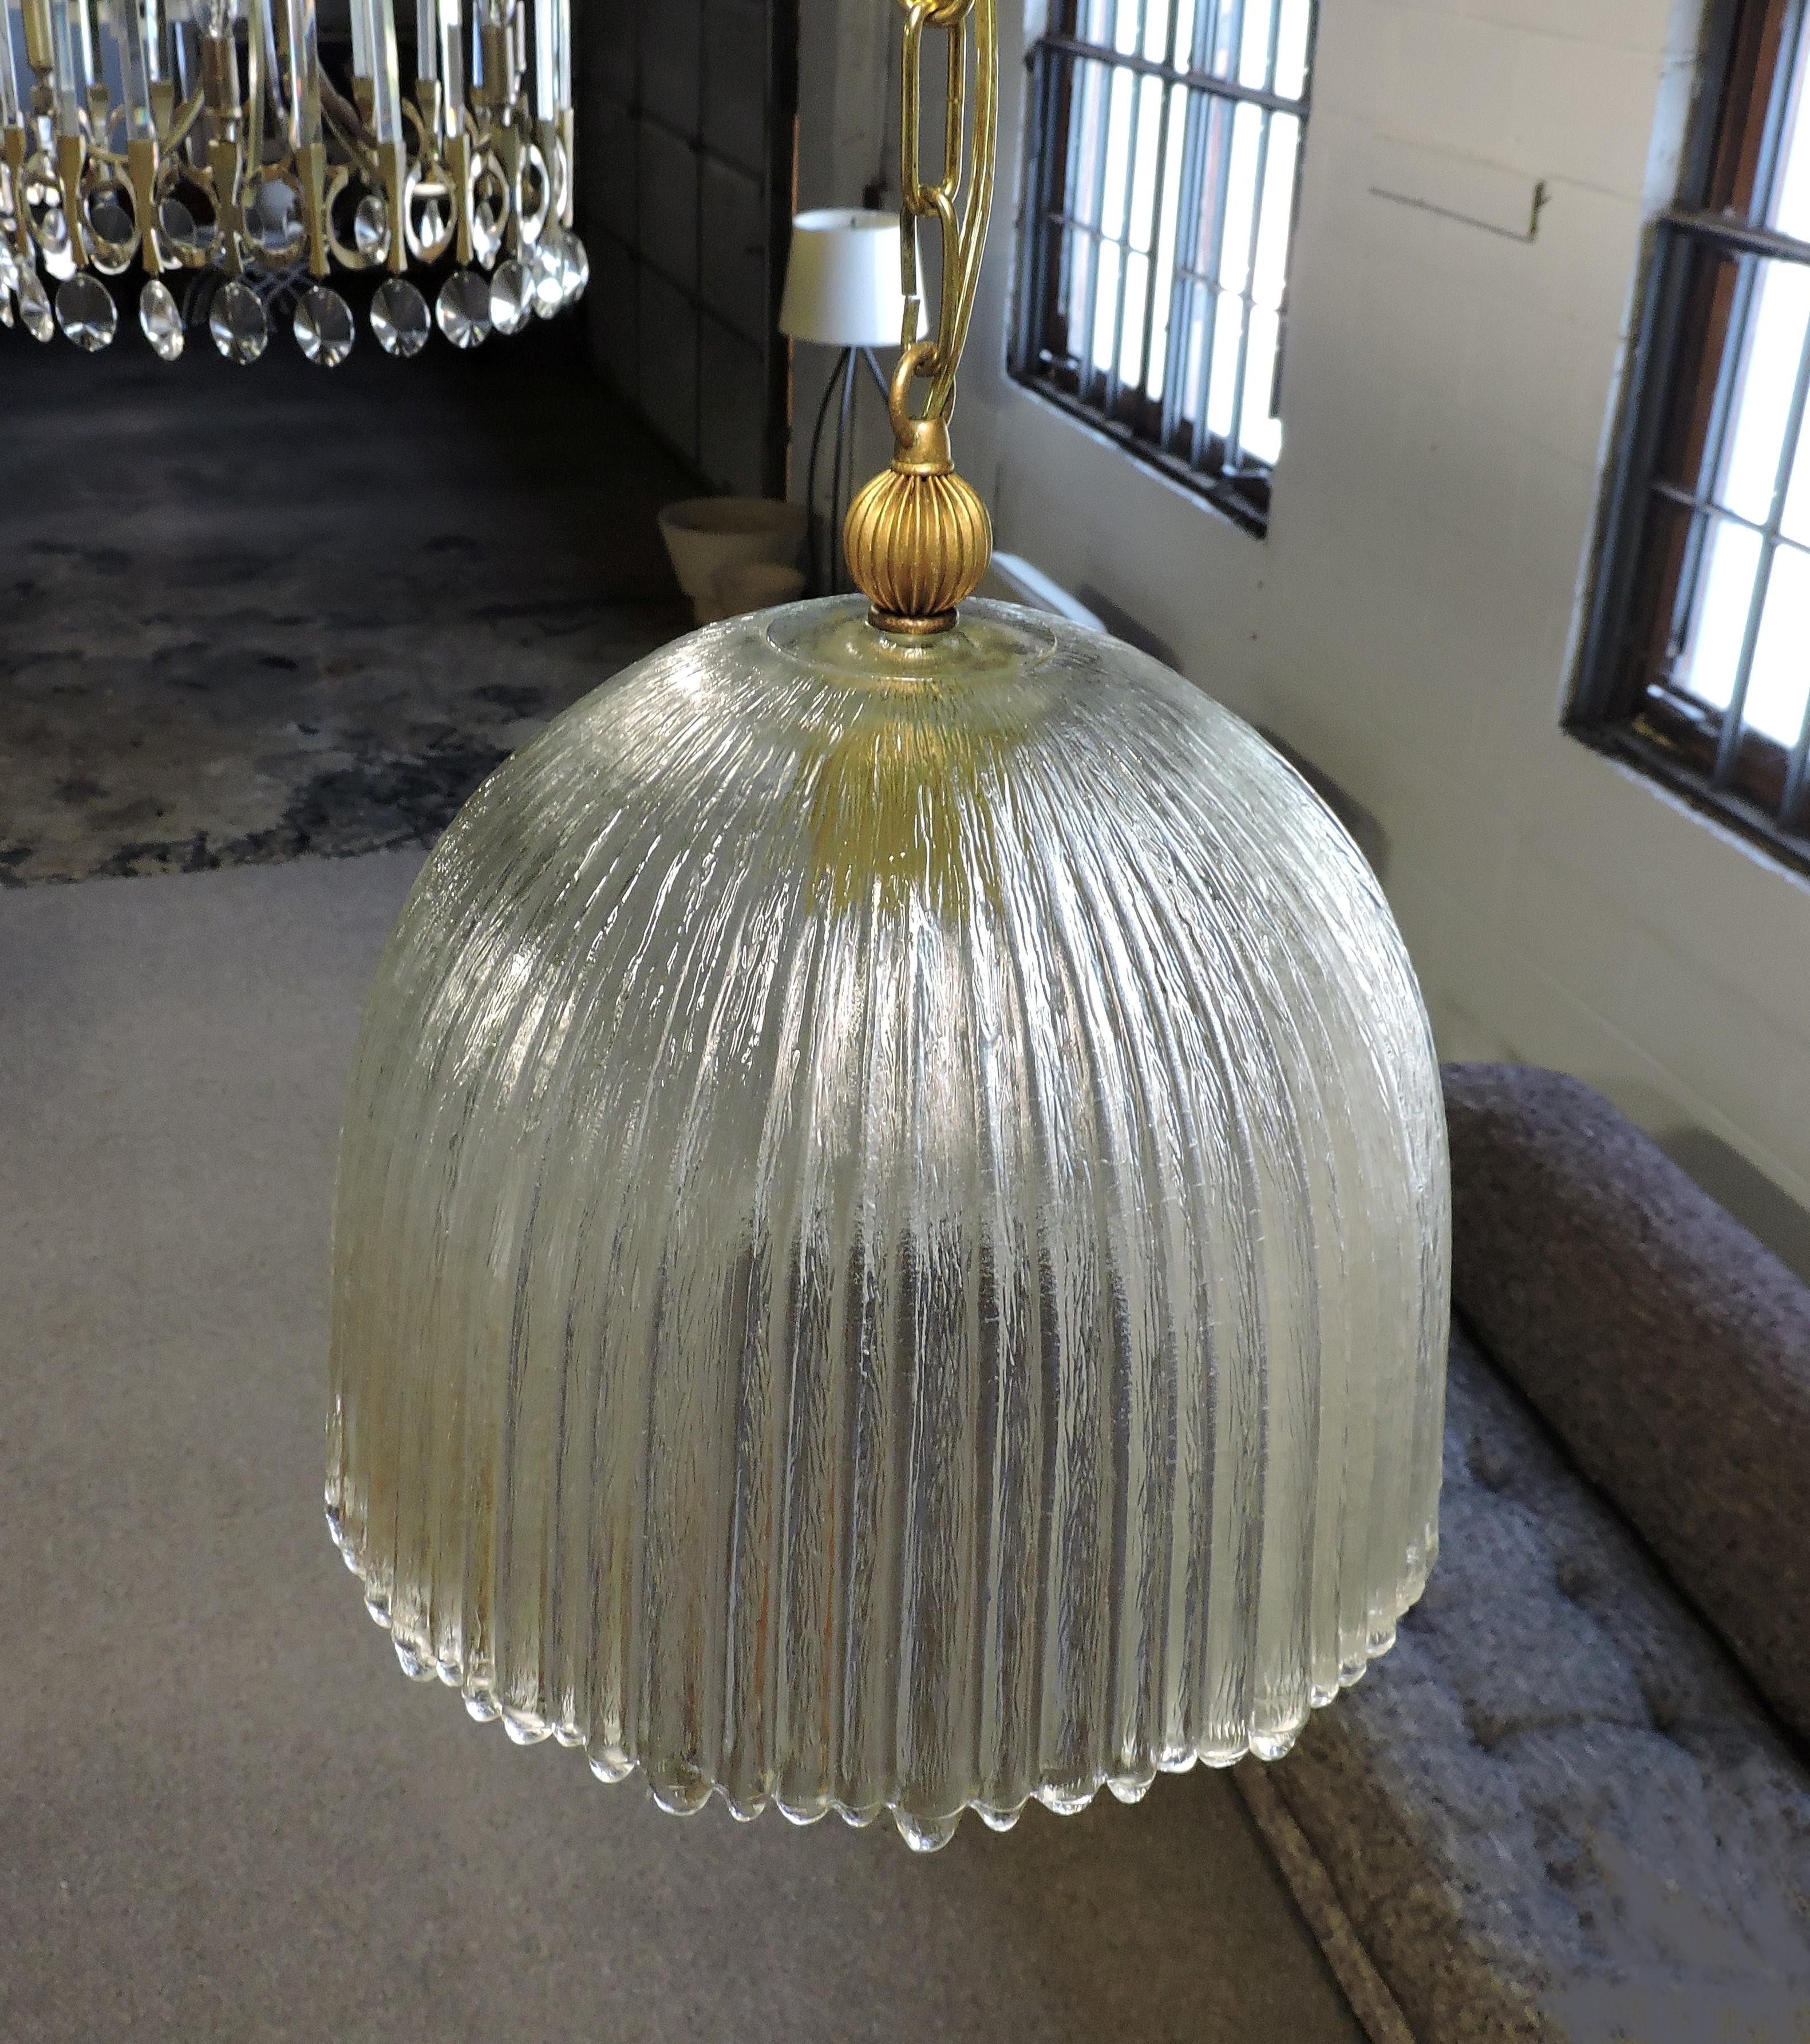 Beautiful Italian glass pendant lamp. This light has a heavy, ribbed and textured dome shade with an uneven edge.